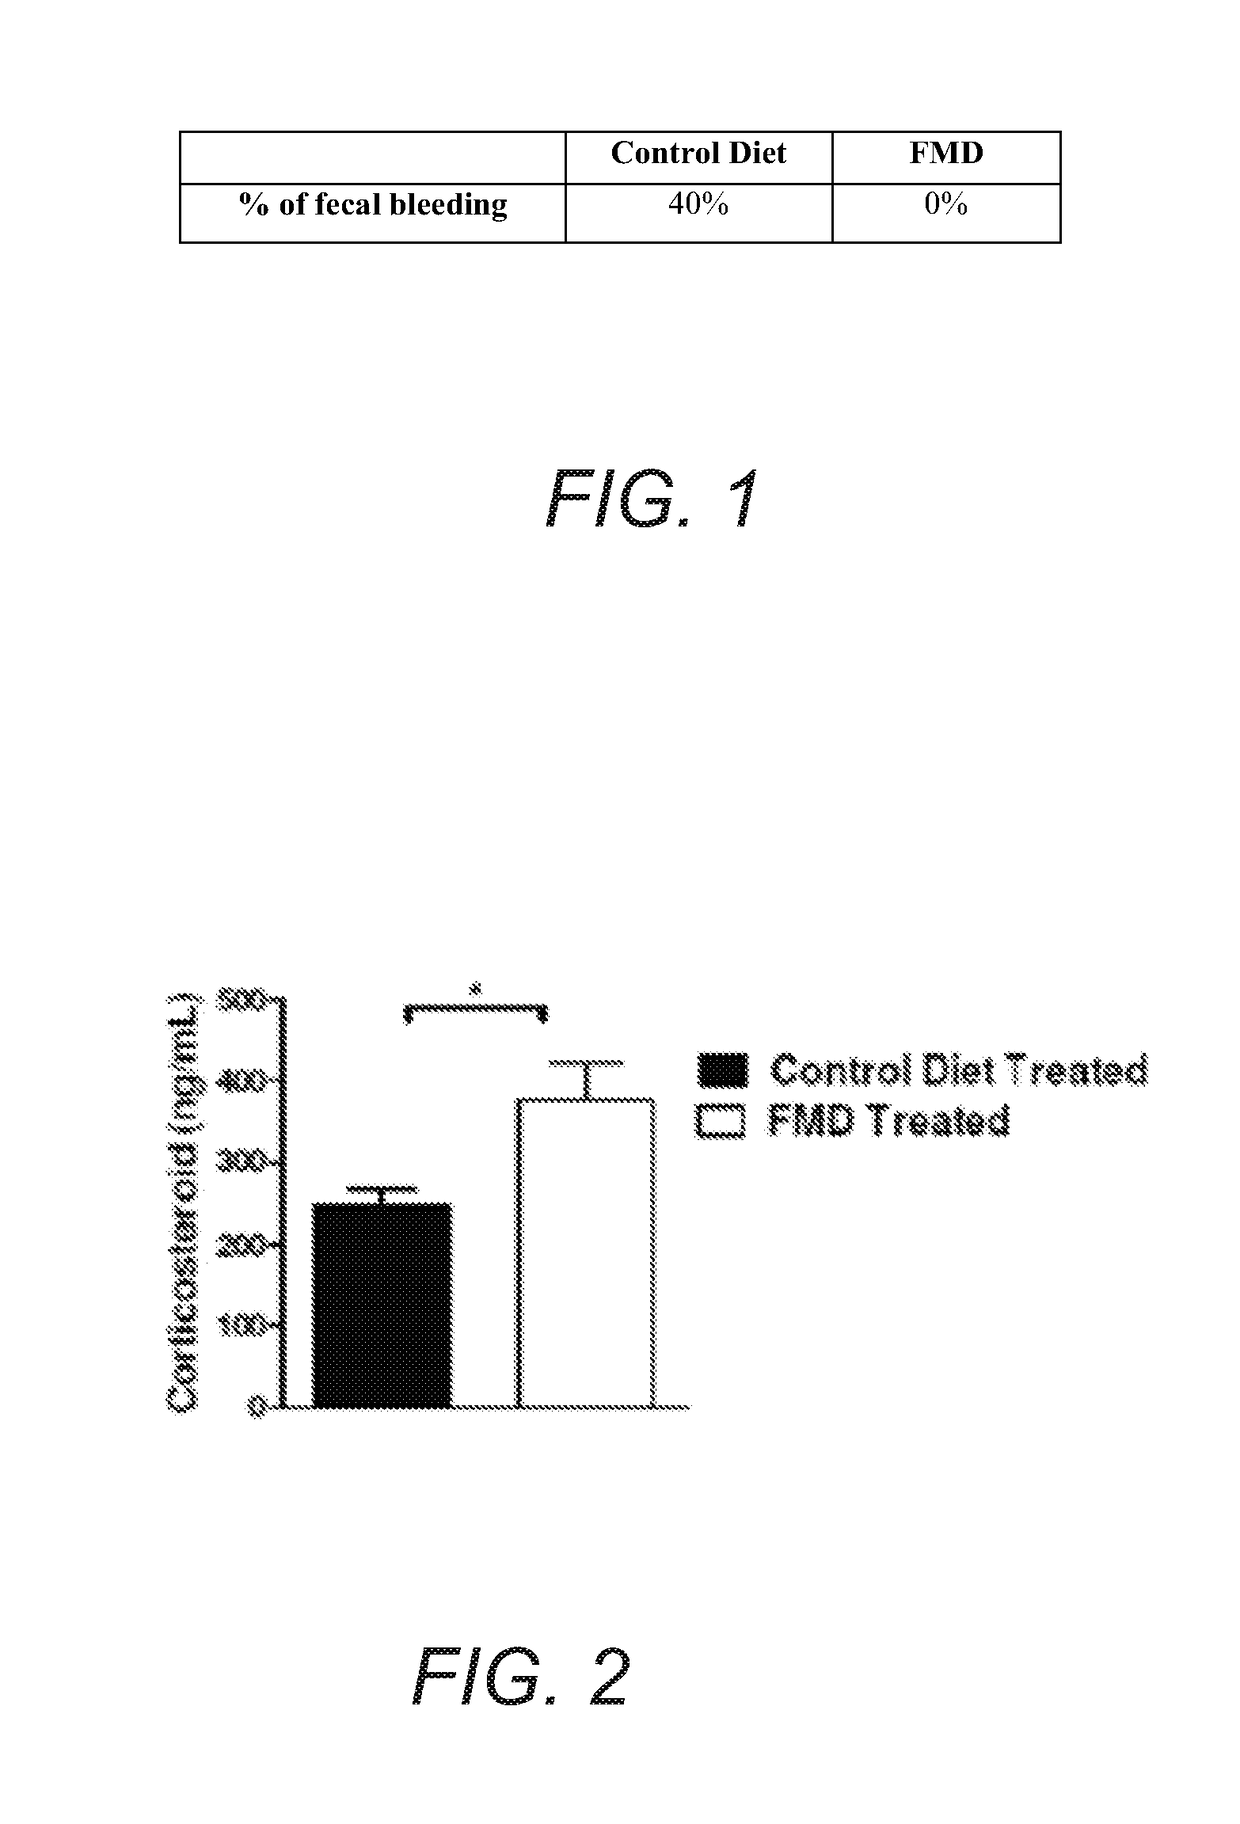 Fasting mimicking diet (FMD) as an immunoregulatory treatment for gastrointestinal autoimmune/inflammatory diseases